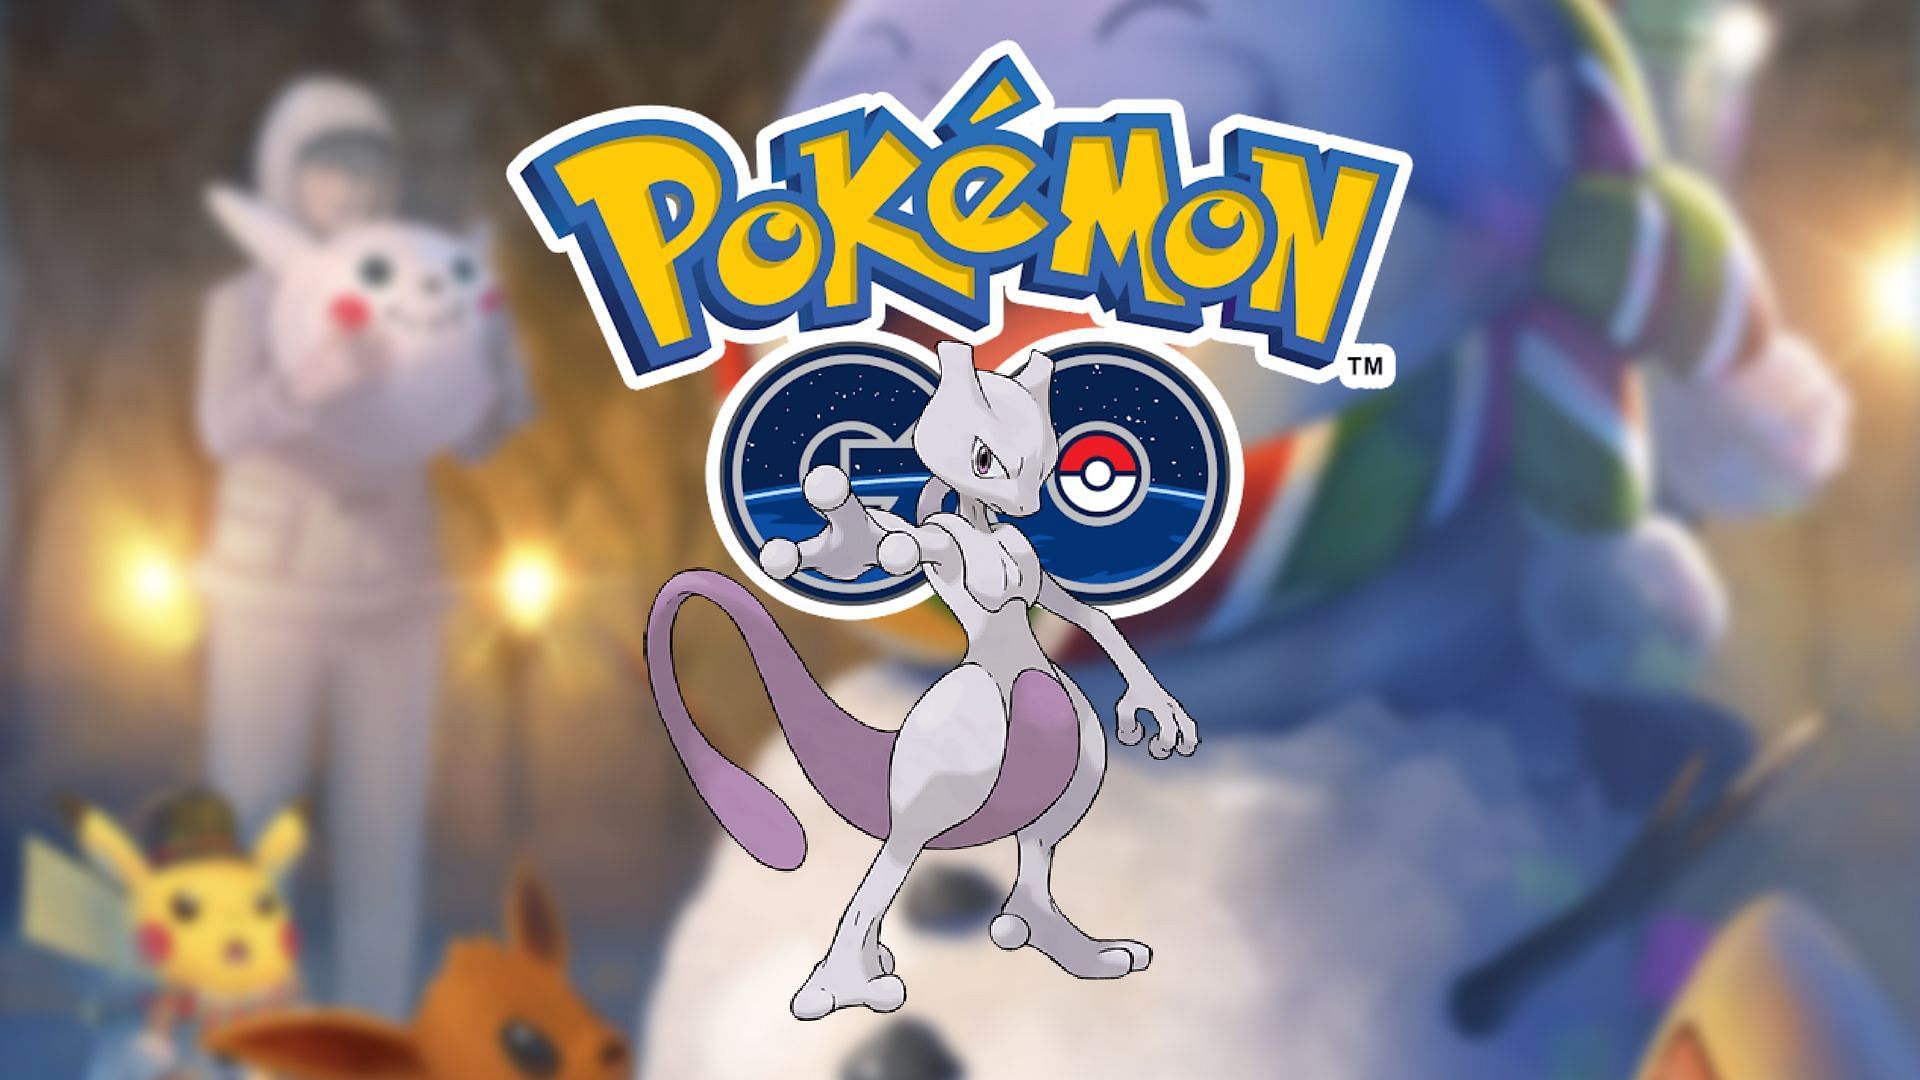 Soon you'll be able to catch the legendary Mew in Pokémon GO